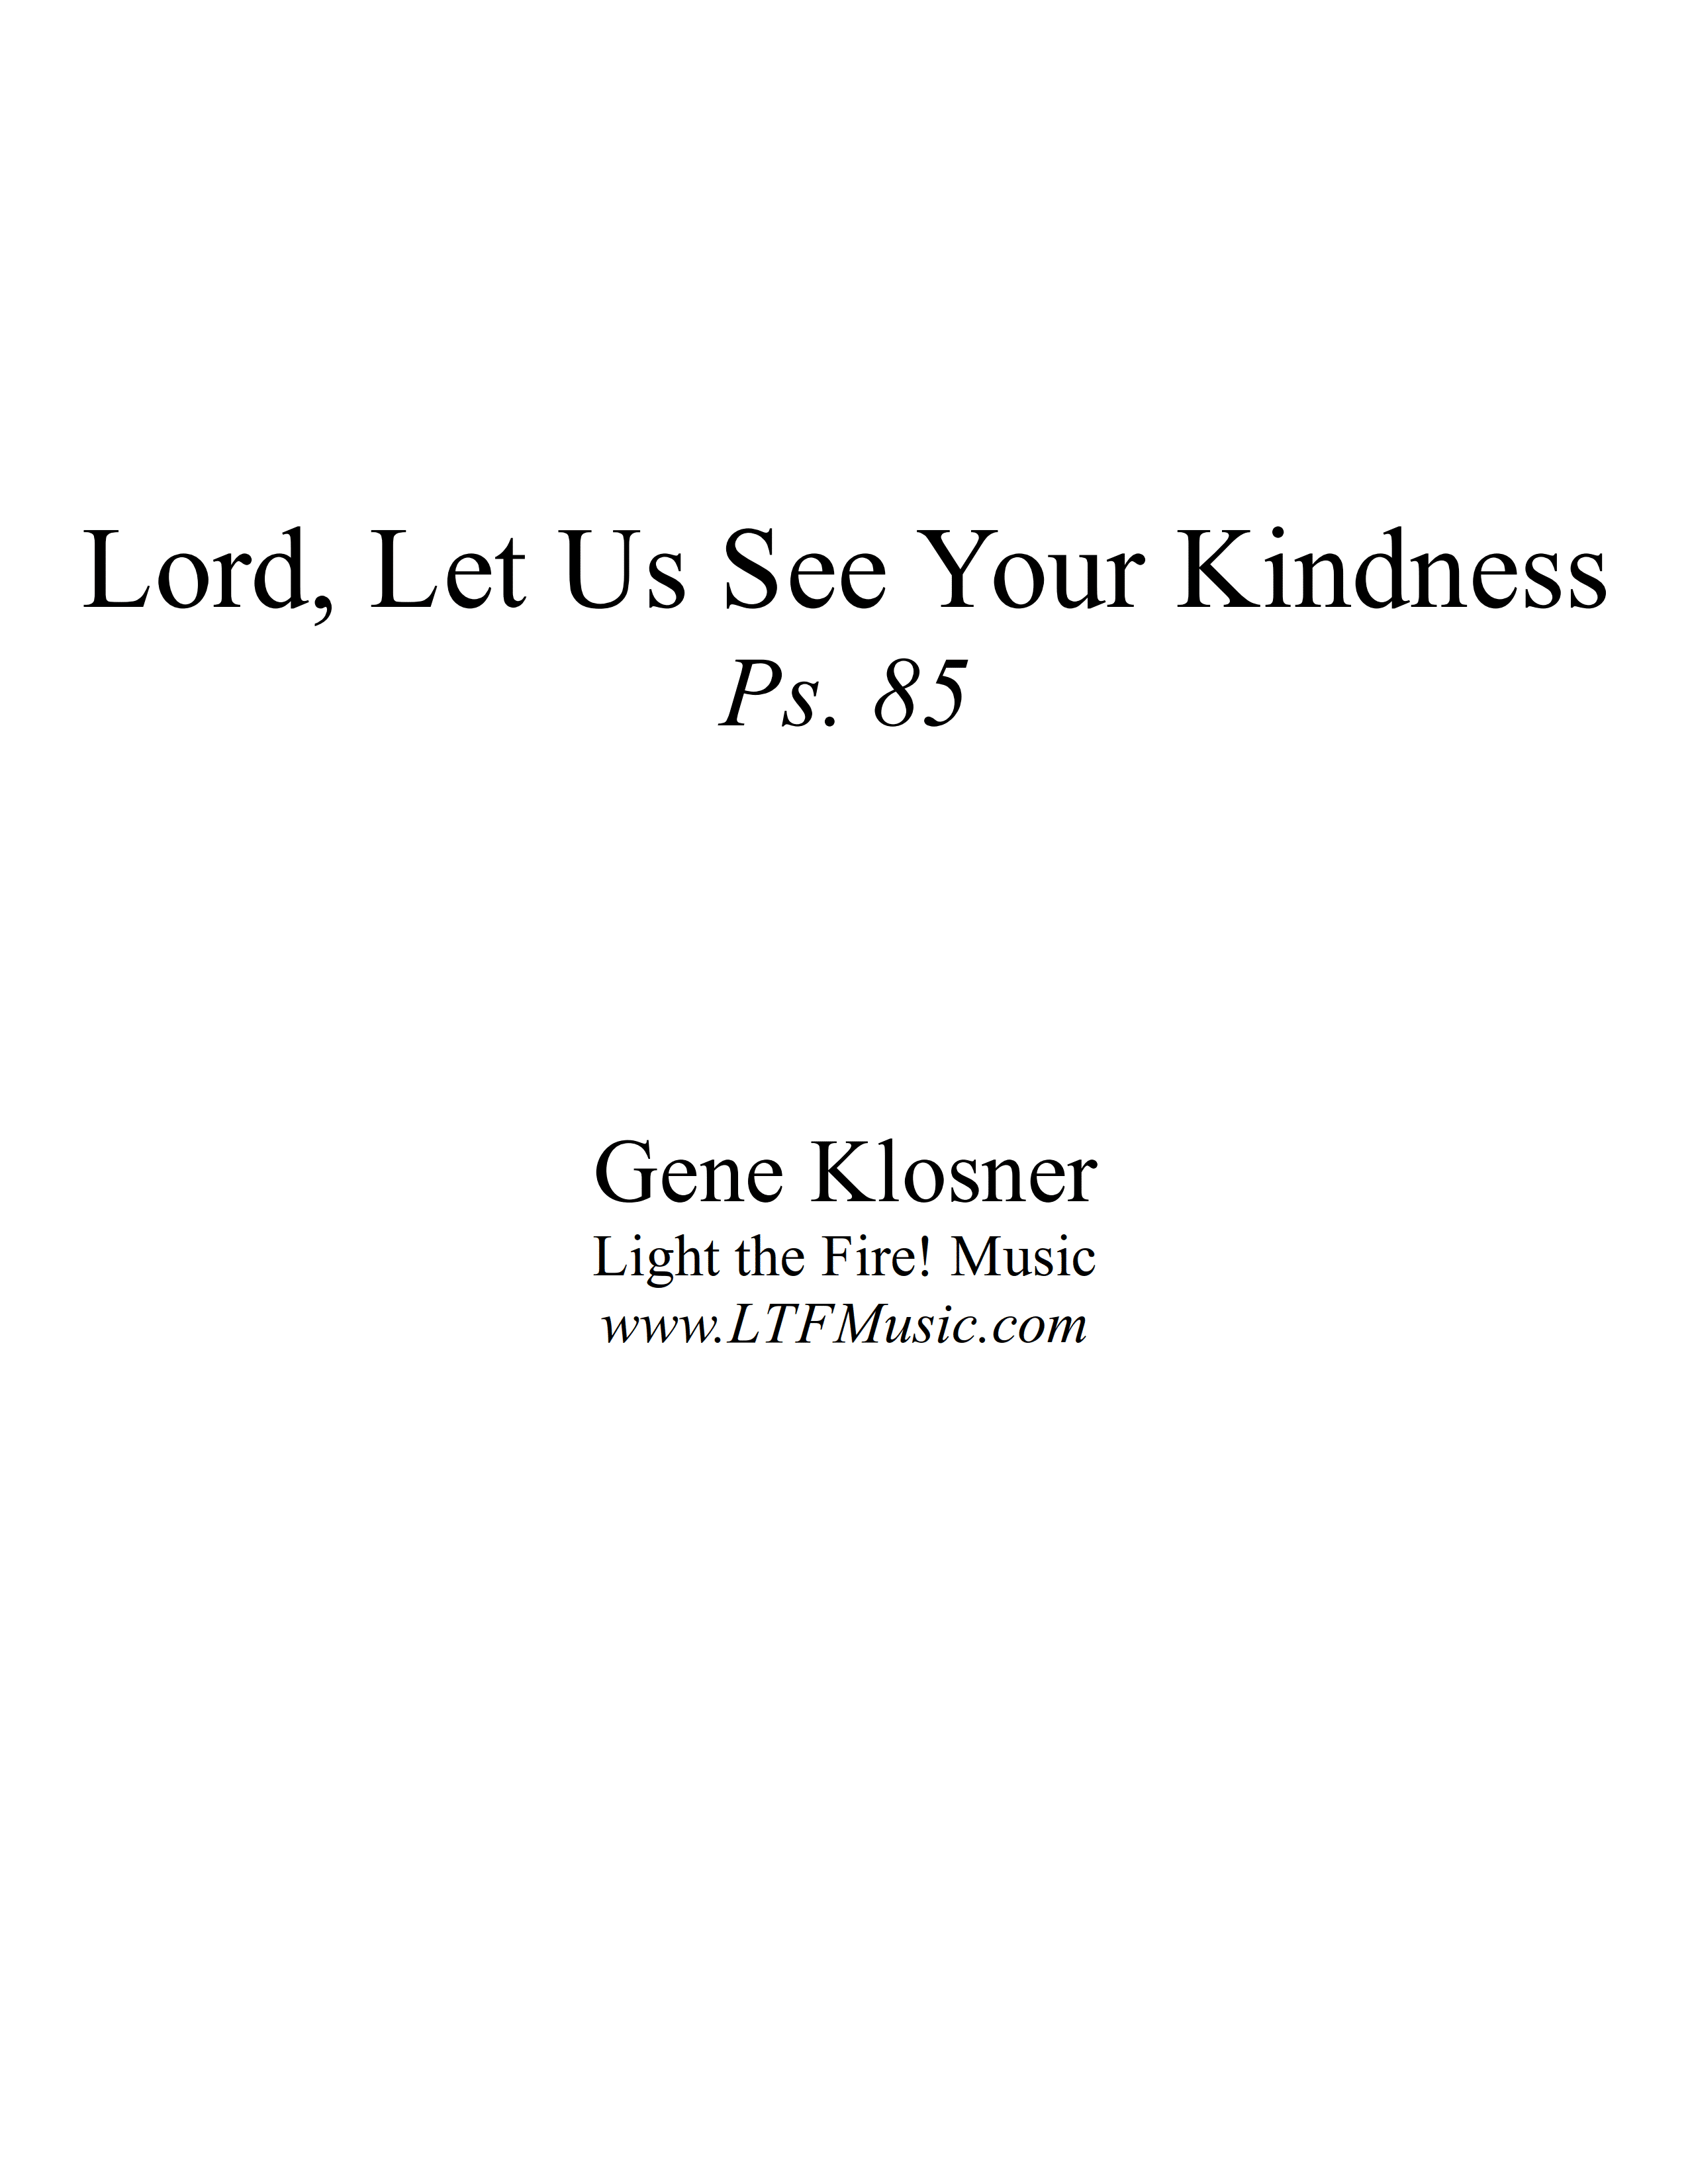 Psalm 85 – Lord, Let Us See Your Kindness (Klosner)